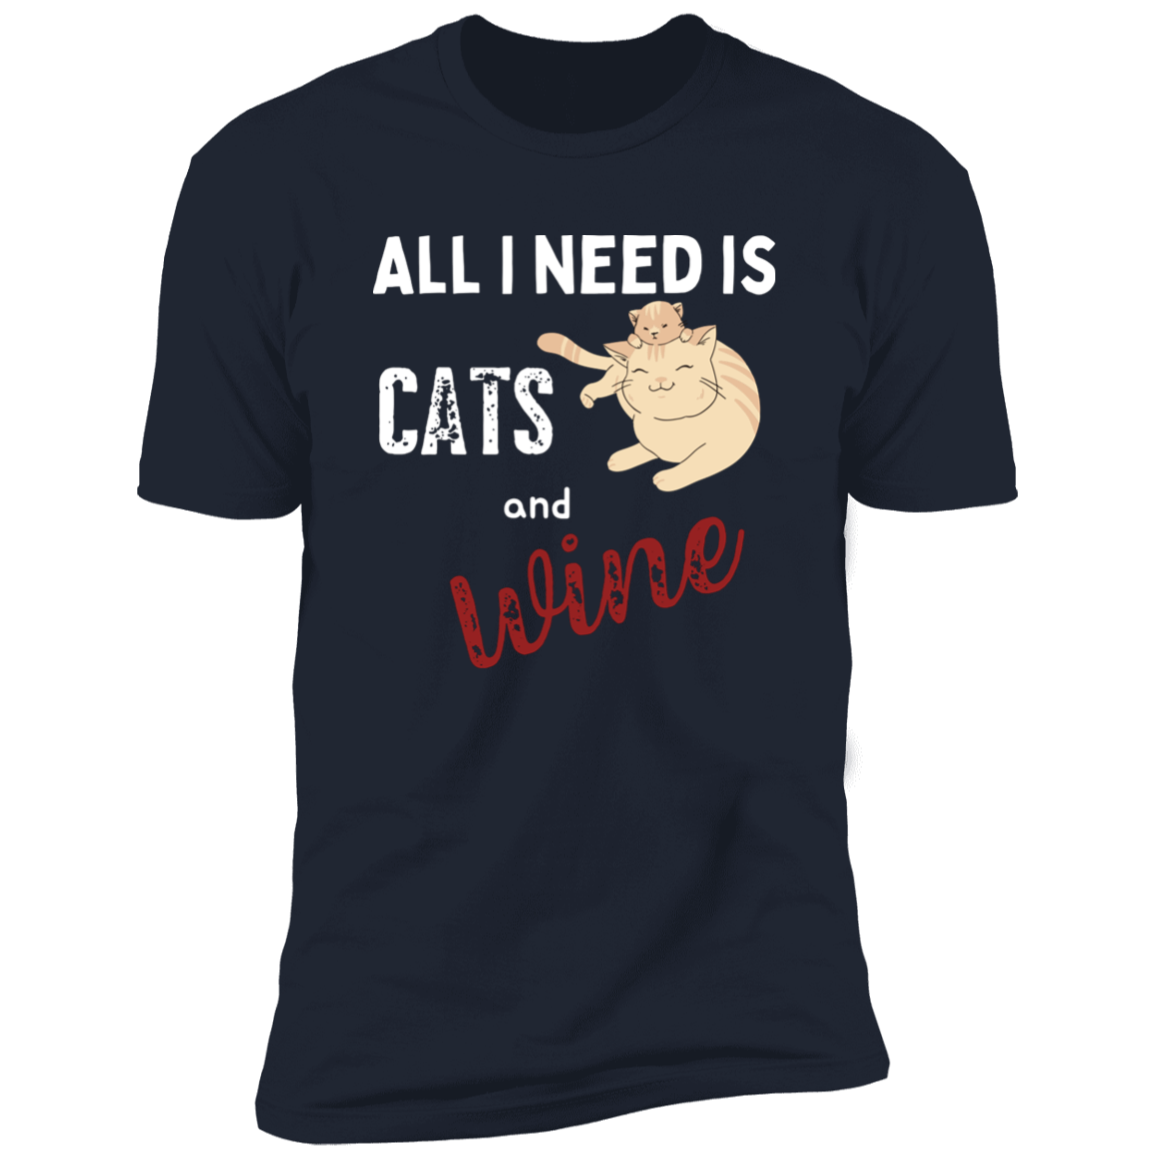 All I Need is Cats and Wine, Cat shirt for humas, in navy blue